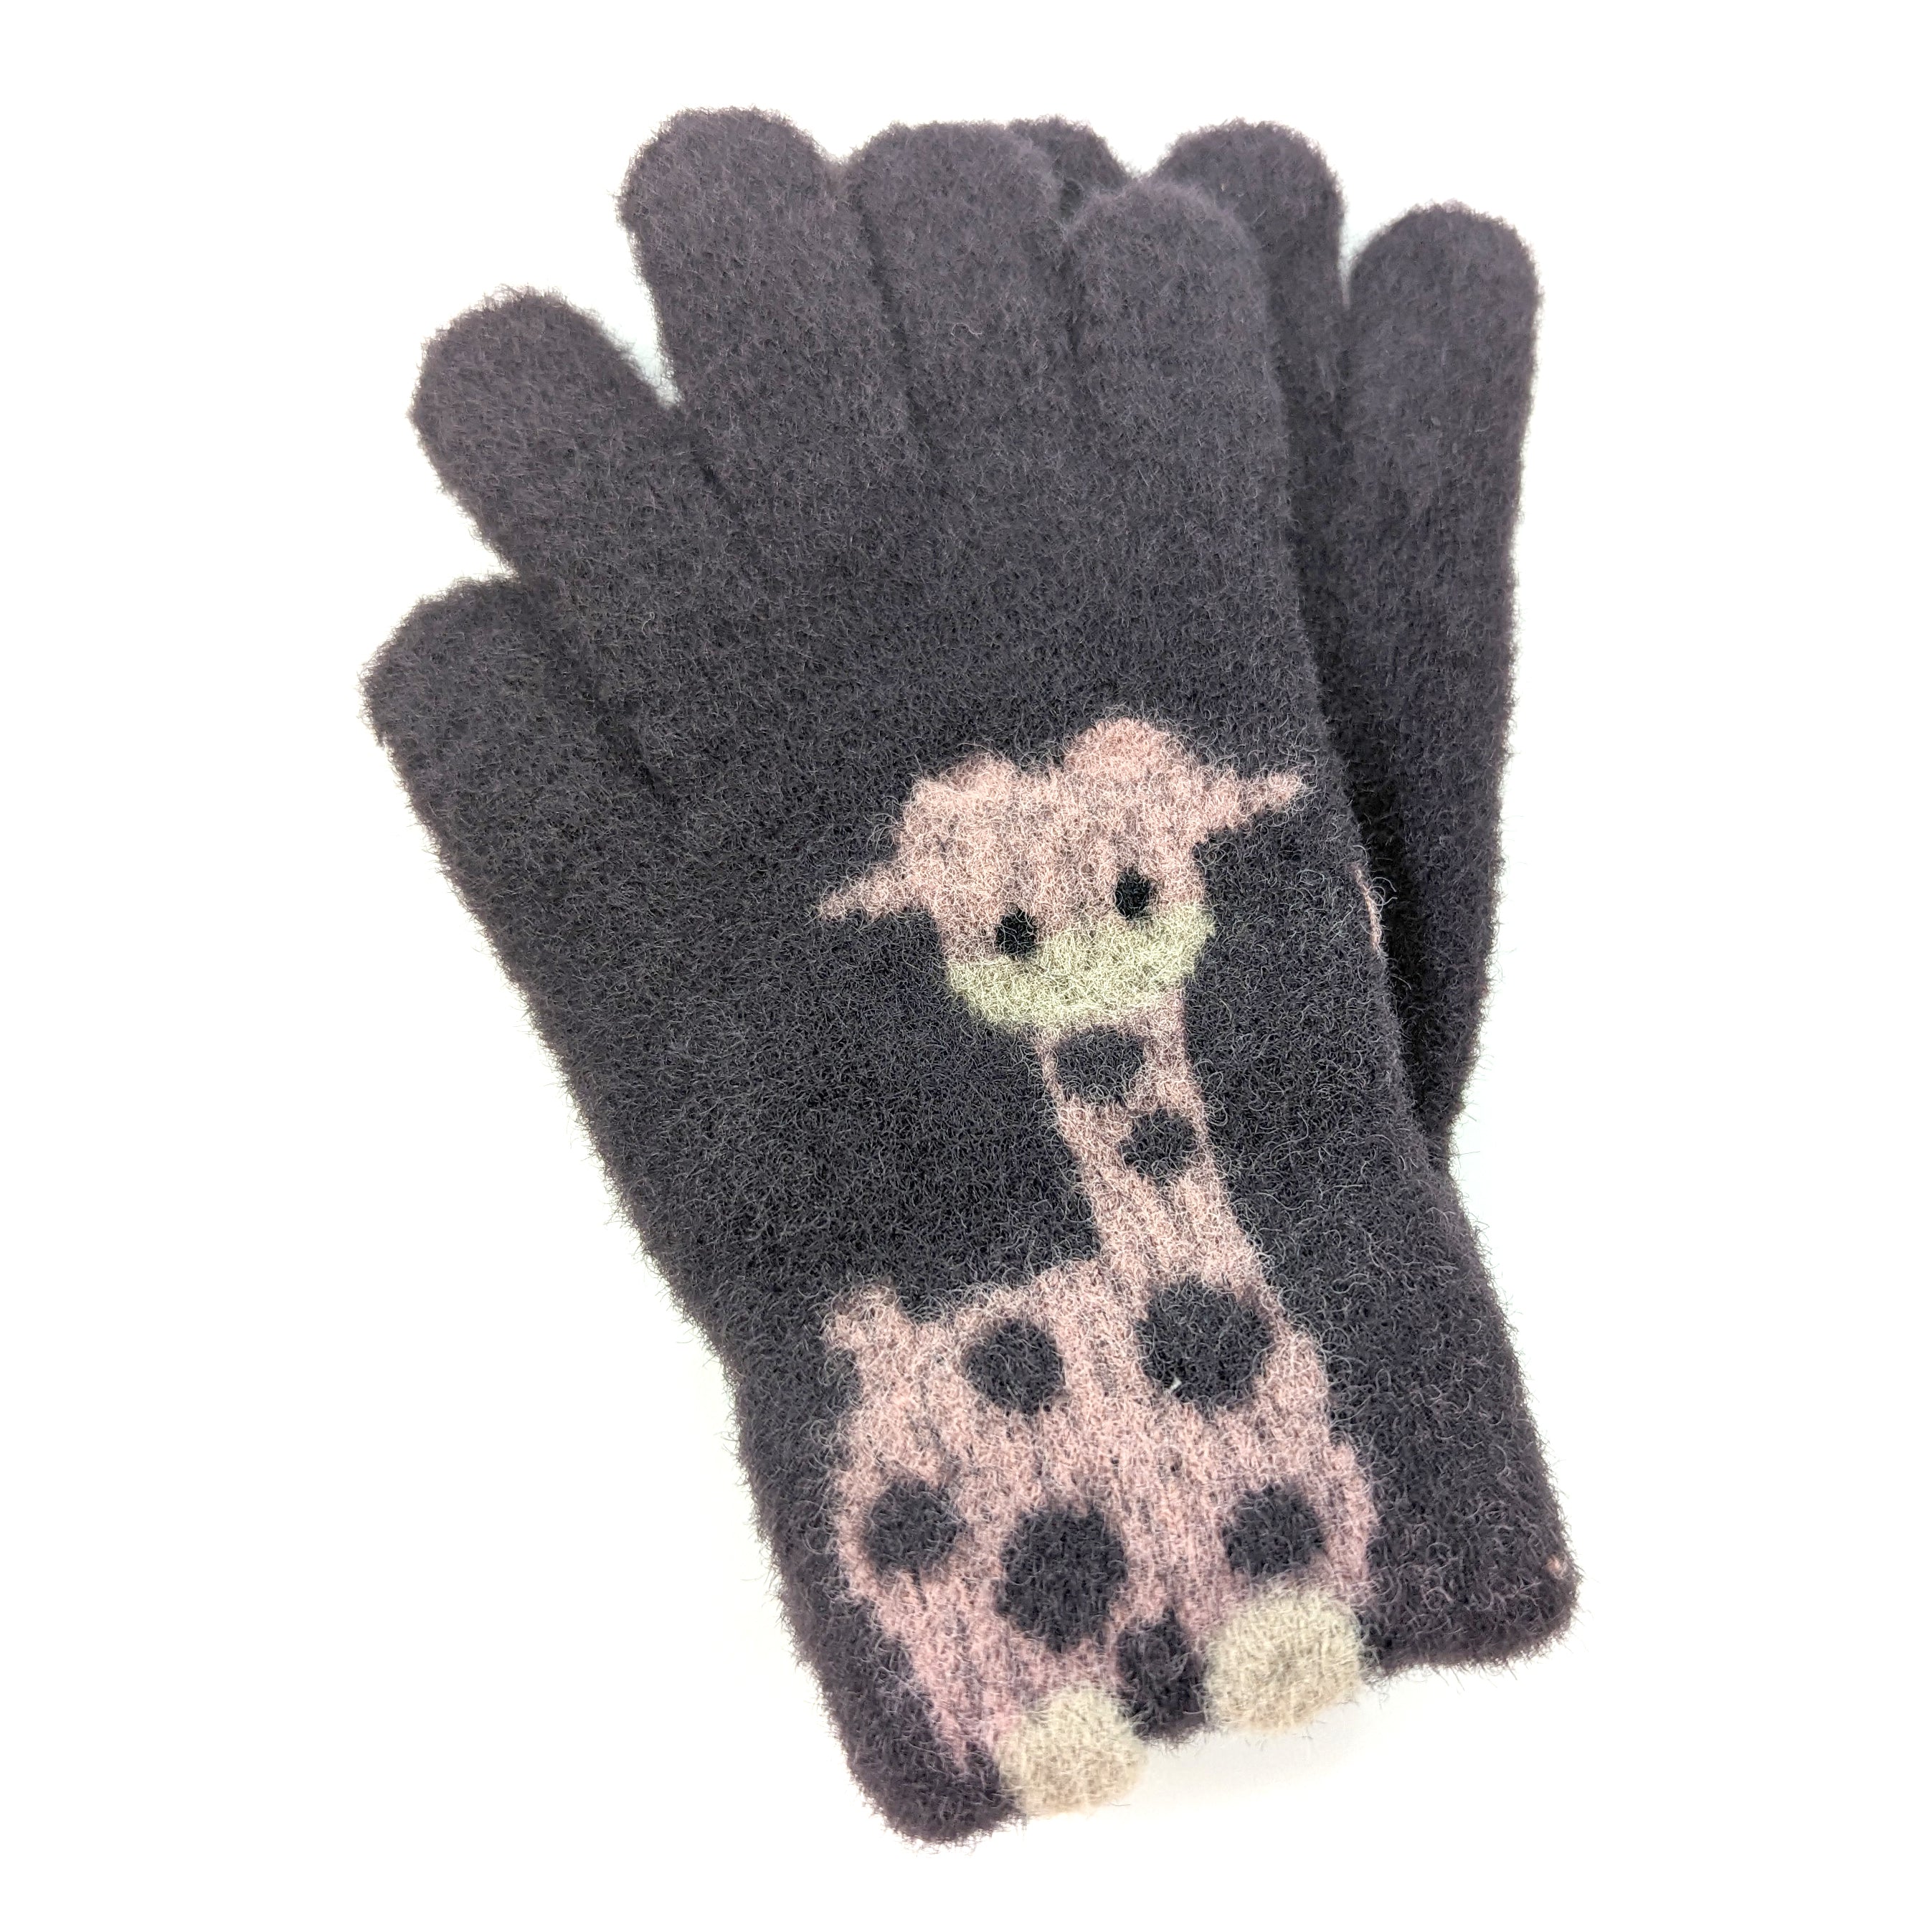 12 Assorted GIraffe Gloves (up to 8 years old)